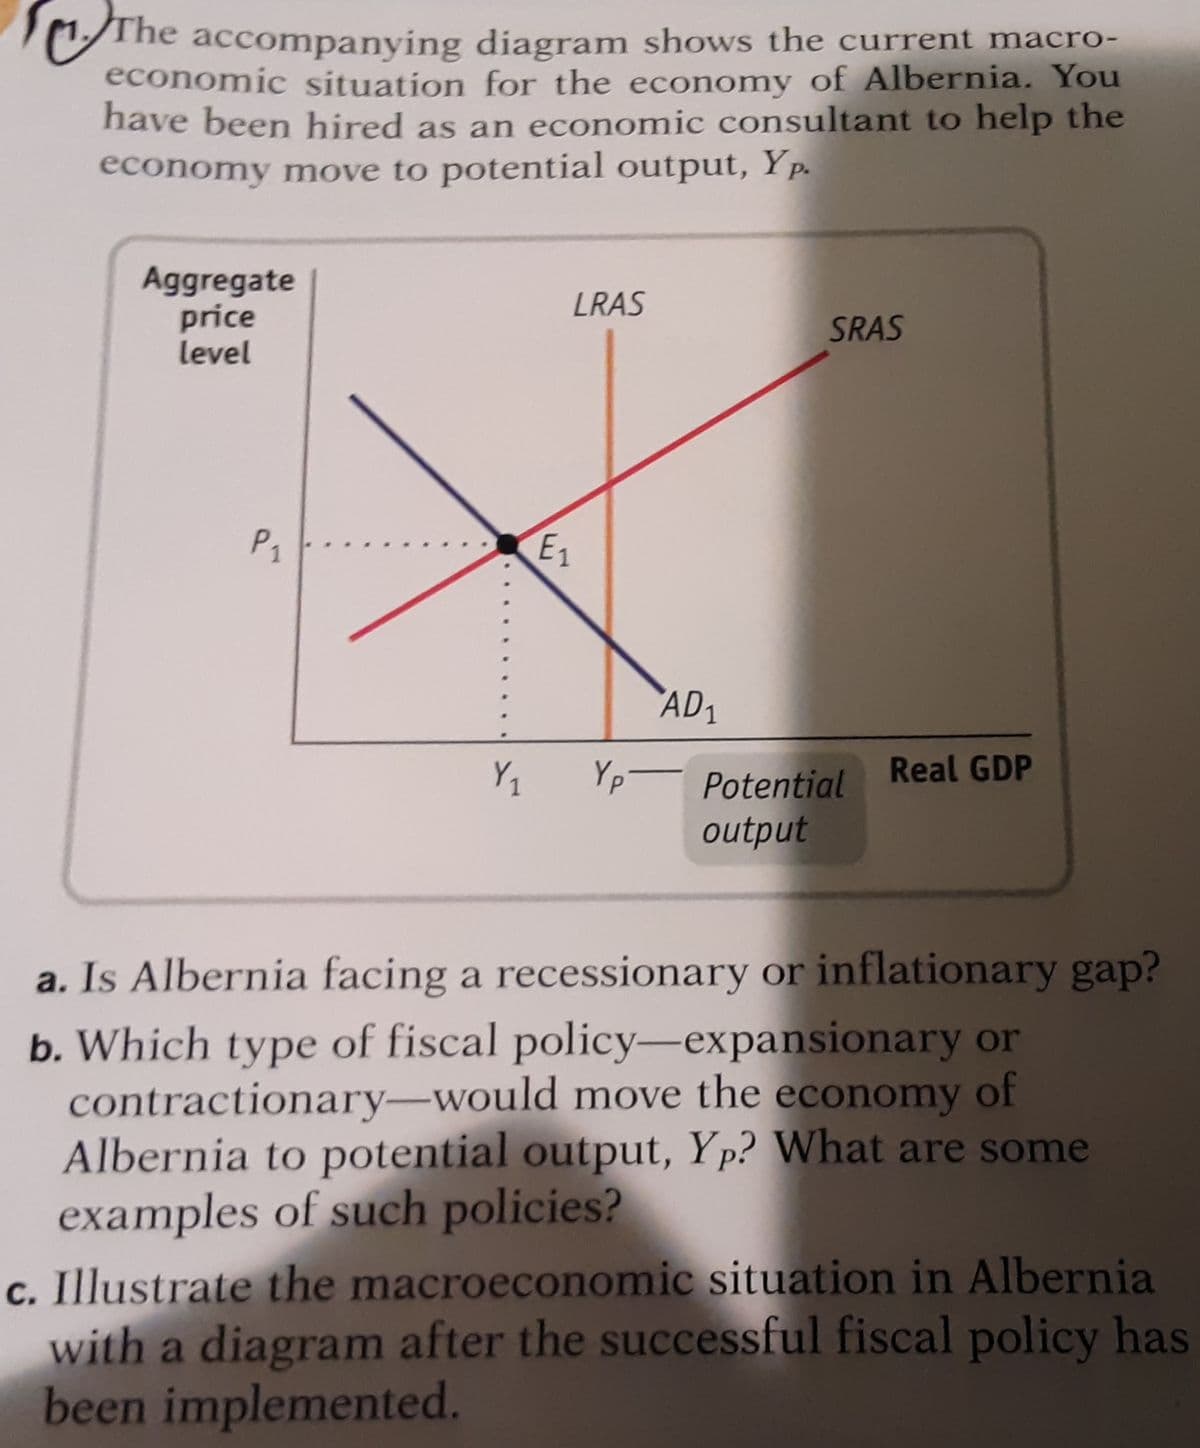 The accompanying diagram shows the current macro-
economic situation for the economy of Albernia. You
have been hired as an economic consultant to help the
economy move to potential output, Yp.
Aggregate
price
level
LRAS
SRAS
P1
E1
AD1
Real GDP
Yp- Potential
output
a. Is Albernia facing a recessionary or inflationary gap?
b. Which type of fiscal policy-expansionary or
contractionary-would move the economy of
Albernia to potential output, Yp? What are some
examples of such policies?
c. Illustrate the macroeconomic situation in Albernia
with a diagram after the successful fiscal policy has
been implemented.
